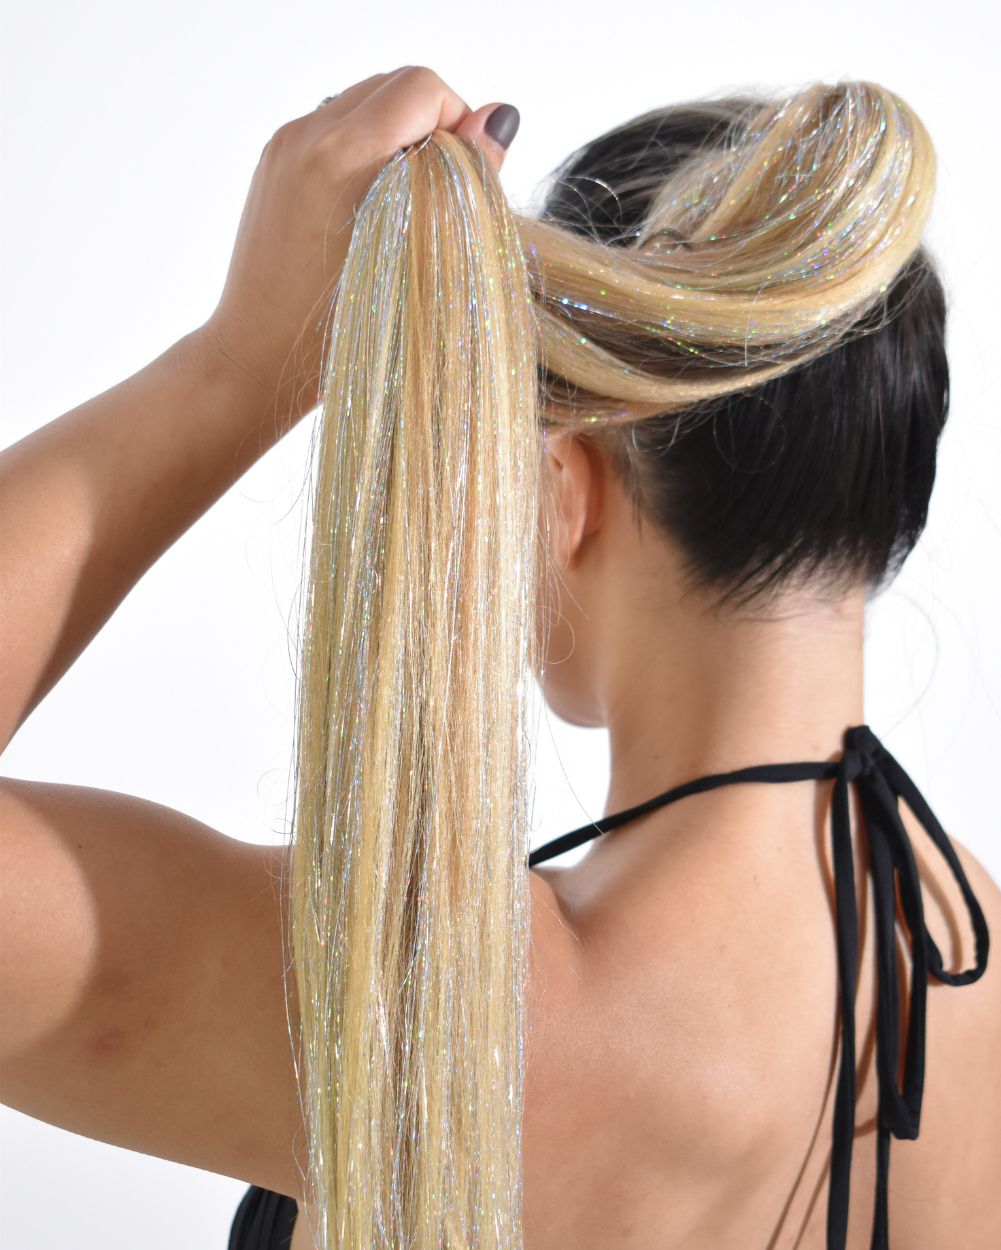 Champagne Sparkle - Blonde Ponytail Hair Extension with Silver Tinsel - Lunautics Ponytail Hair Extension